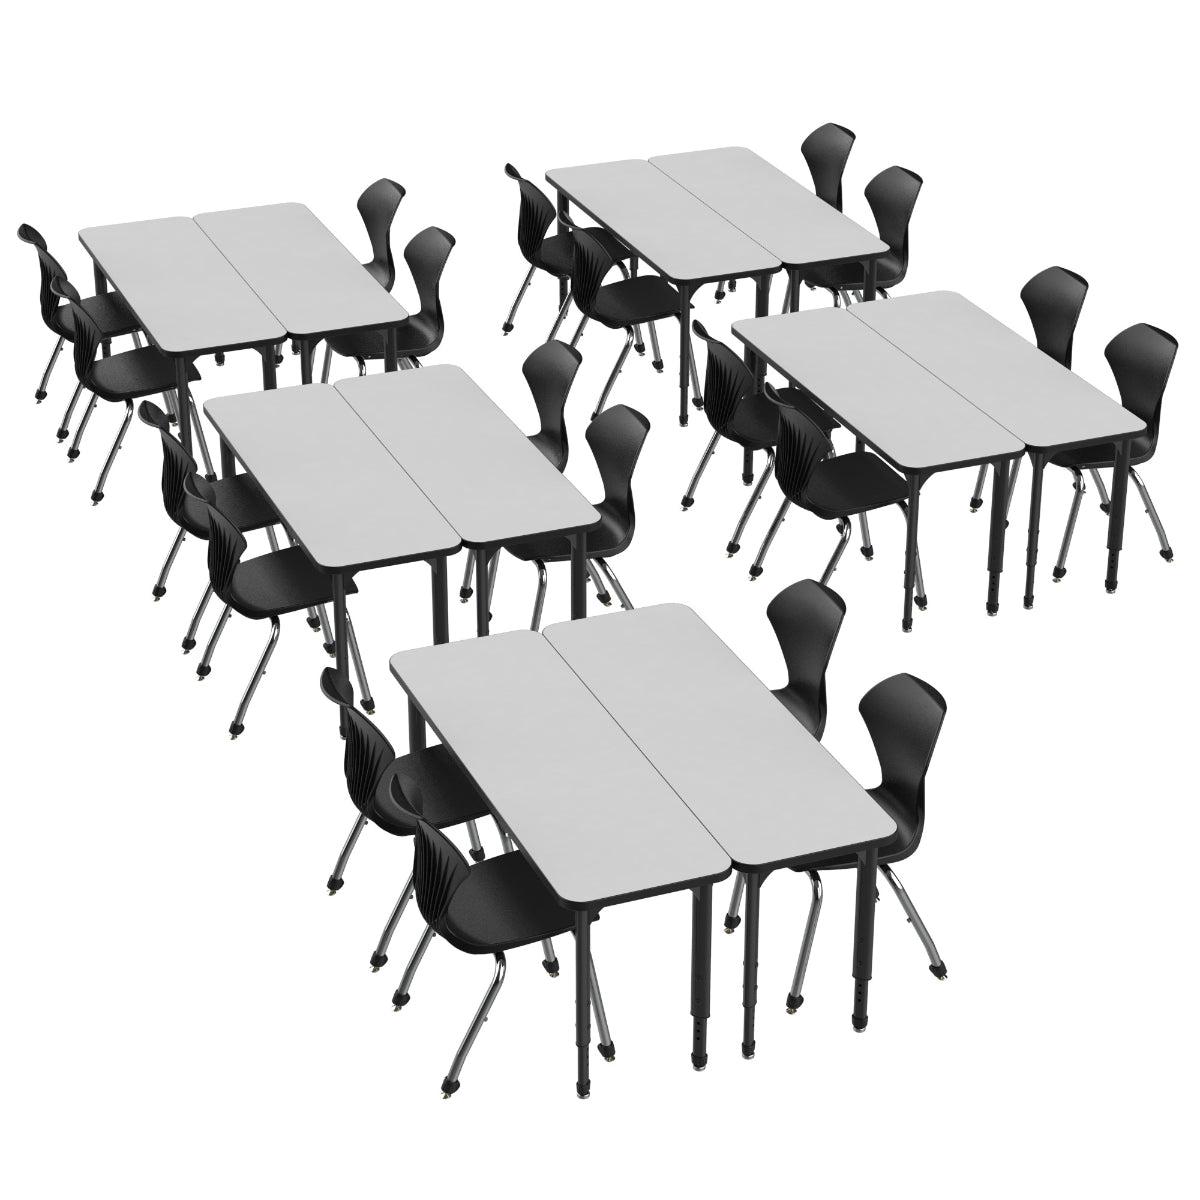 Apex Dry Erase Classroom Desk and Chair Package, 10 Rectangle 2-Student Collaborative Desks, 20" x 60", with 20 Apex Stack Chairs